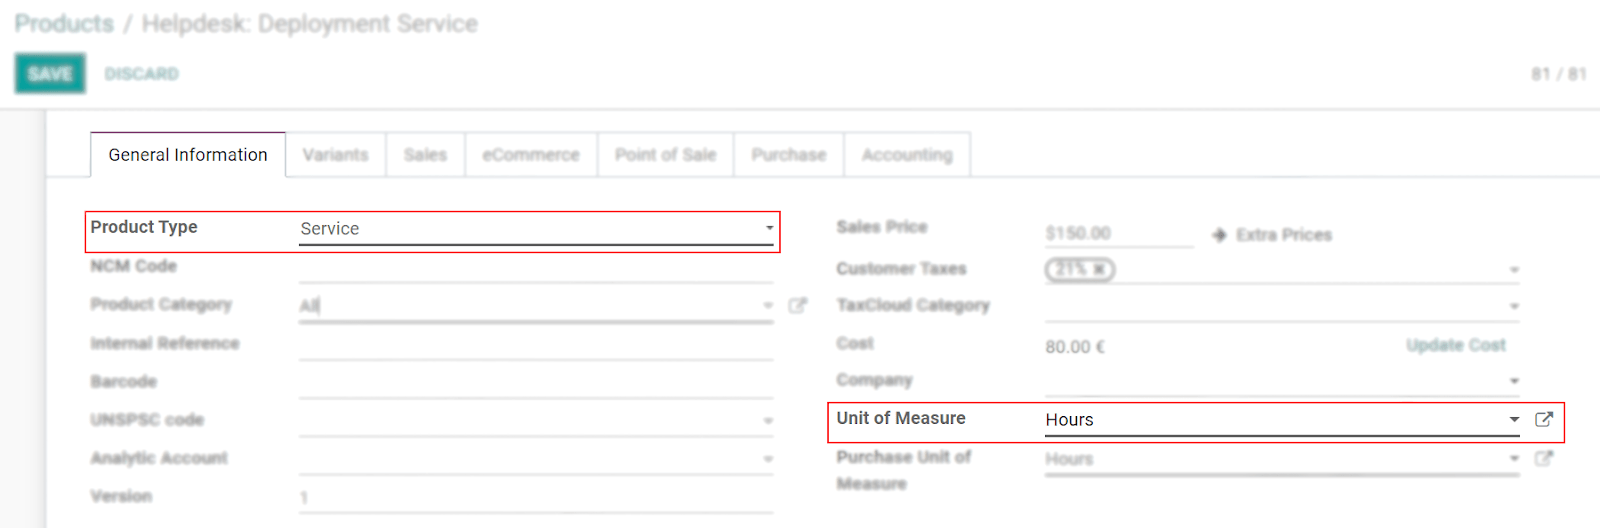 View of a product's form emphasizing the product type and unit of measure fields in Odoo Sales